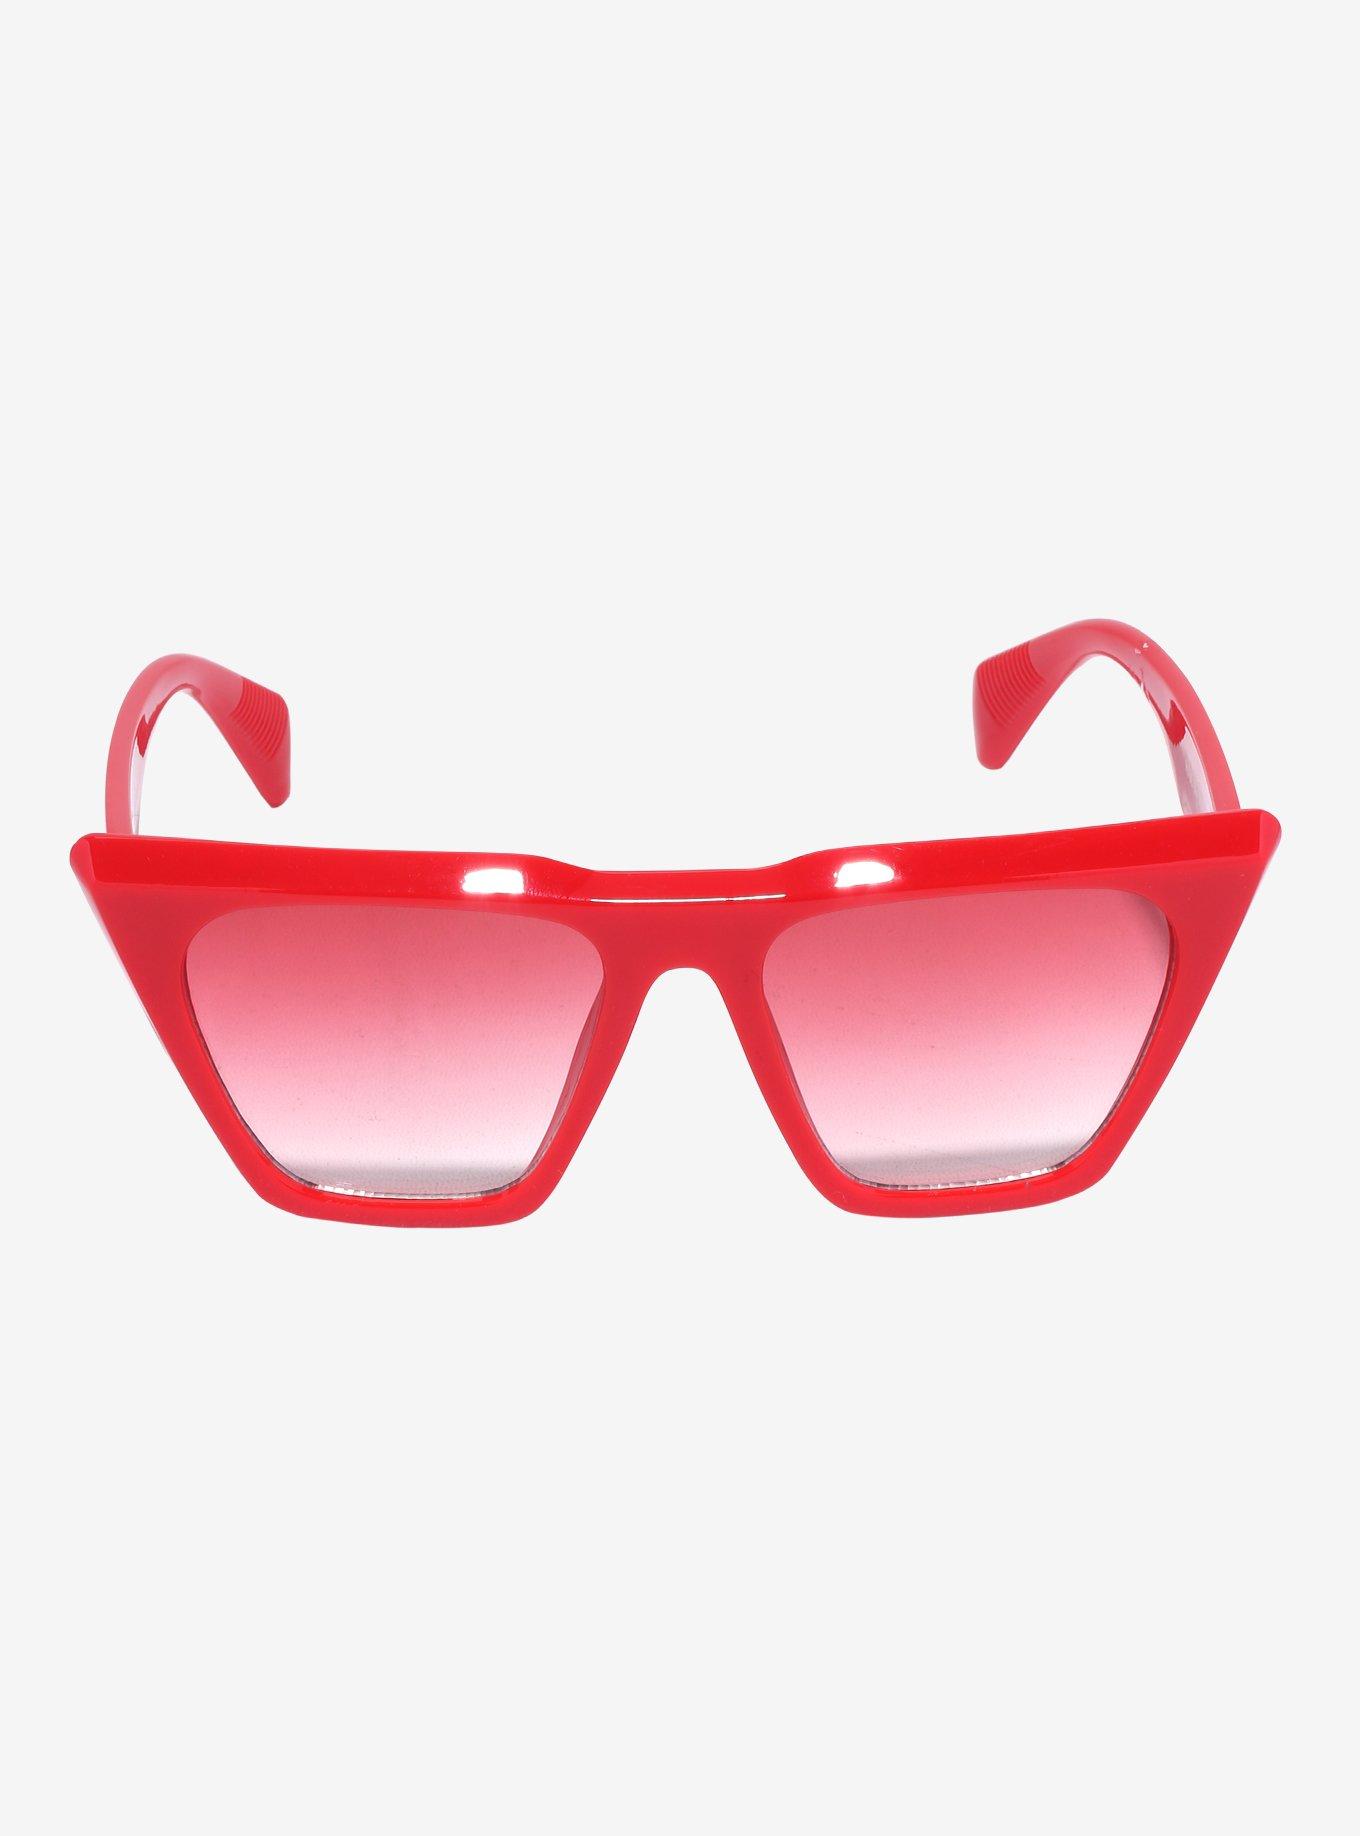 Red Pointed Square Sunglasses